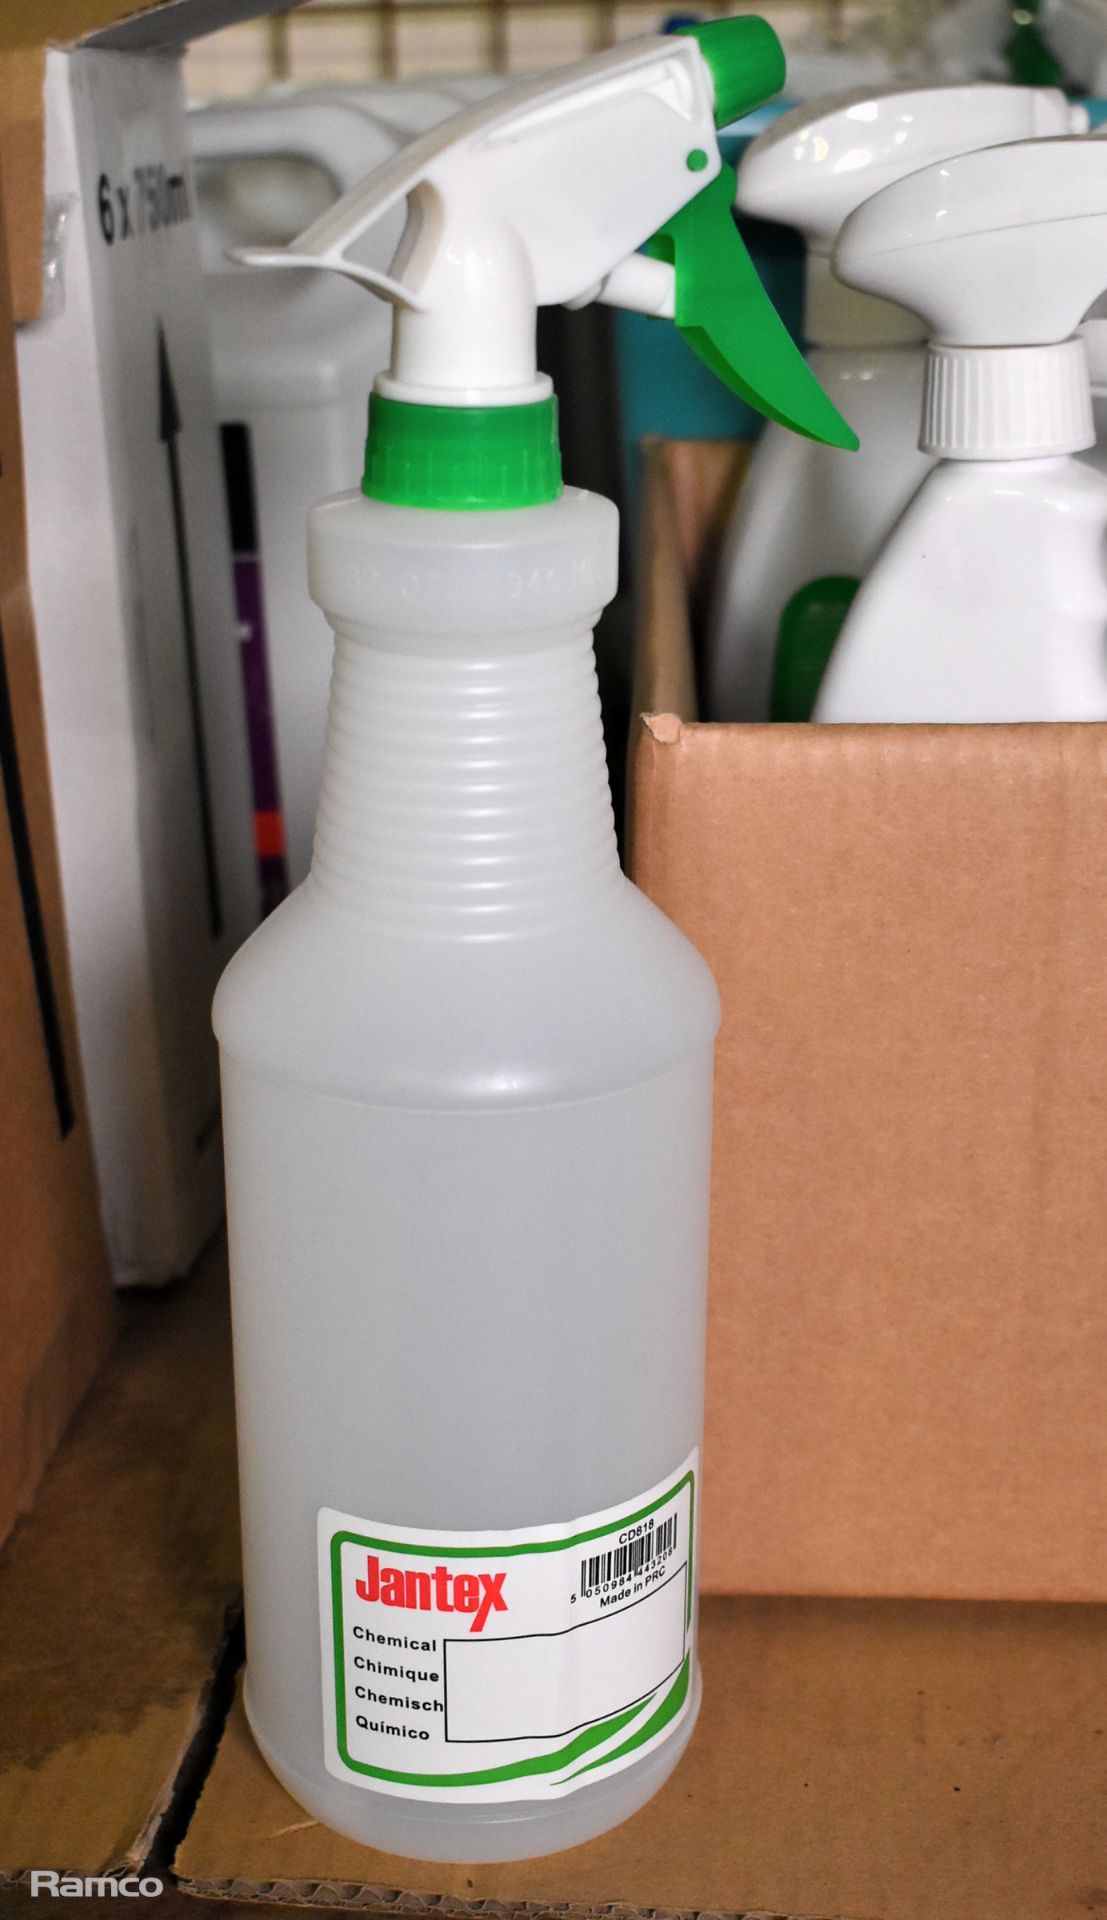 Multi-purpose cleaner disinfectant 5ltr and hand sprays, fabric refresher spray, empty hand sprayer - Image 11 of 11